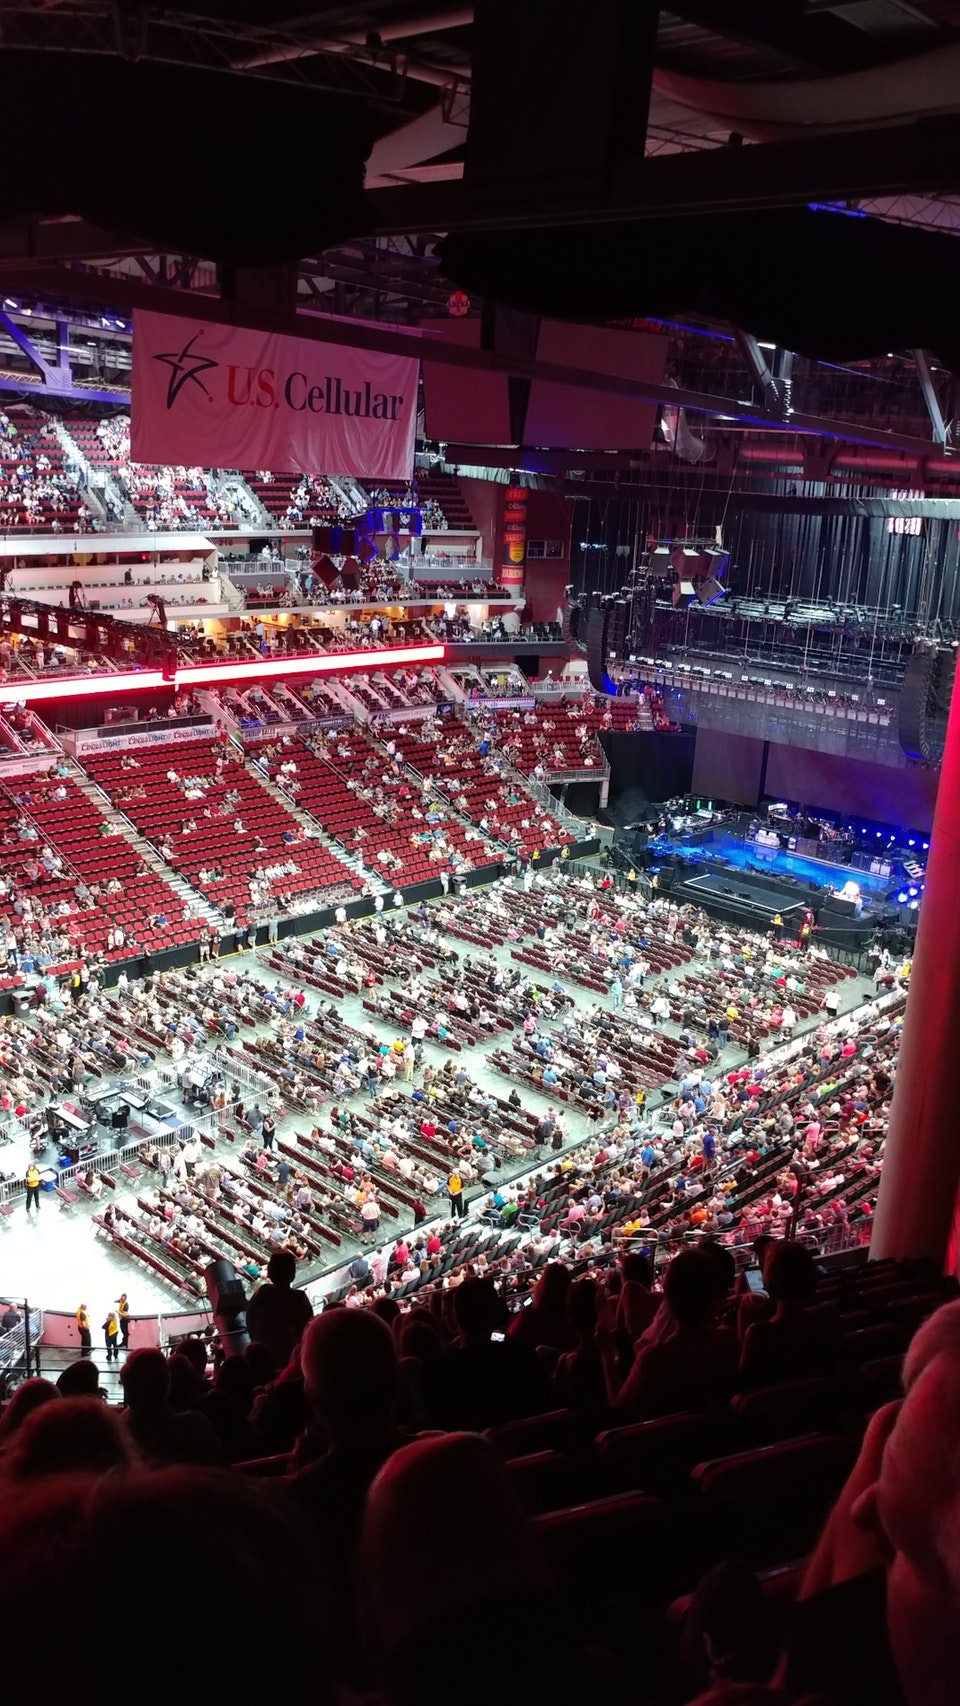 Section 308 at Wells Fargo Arena for Concerts